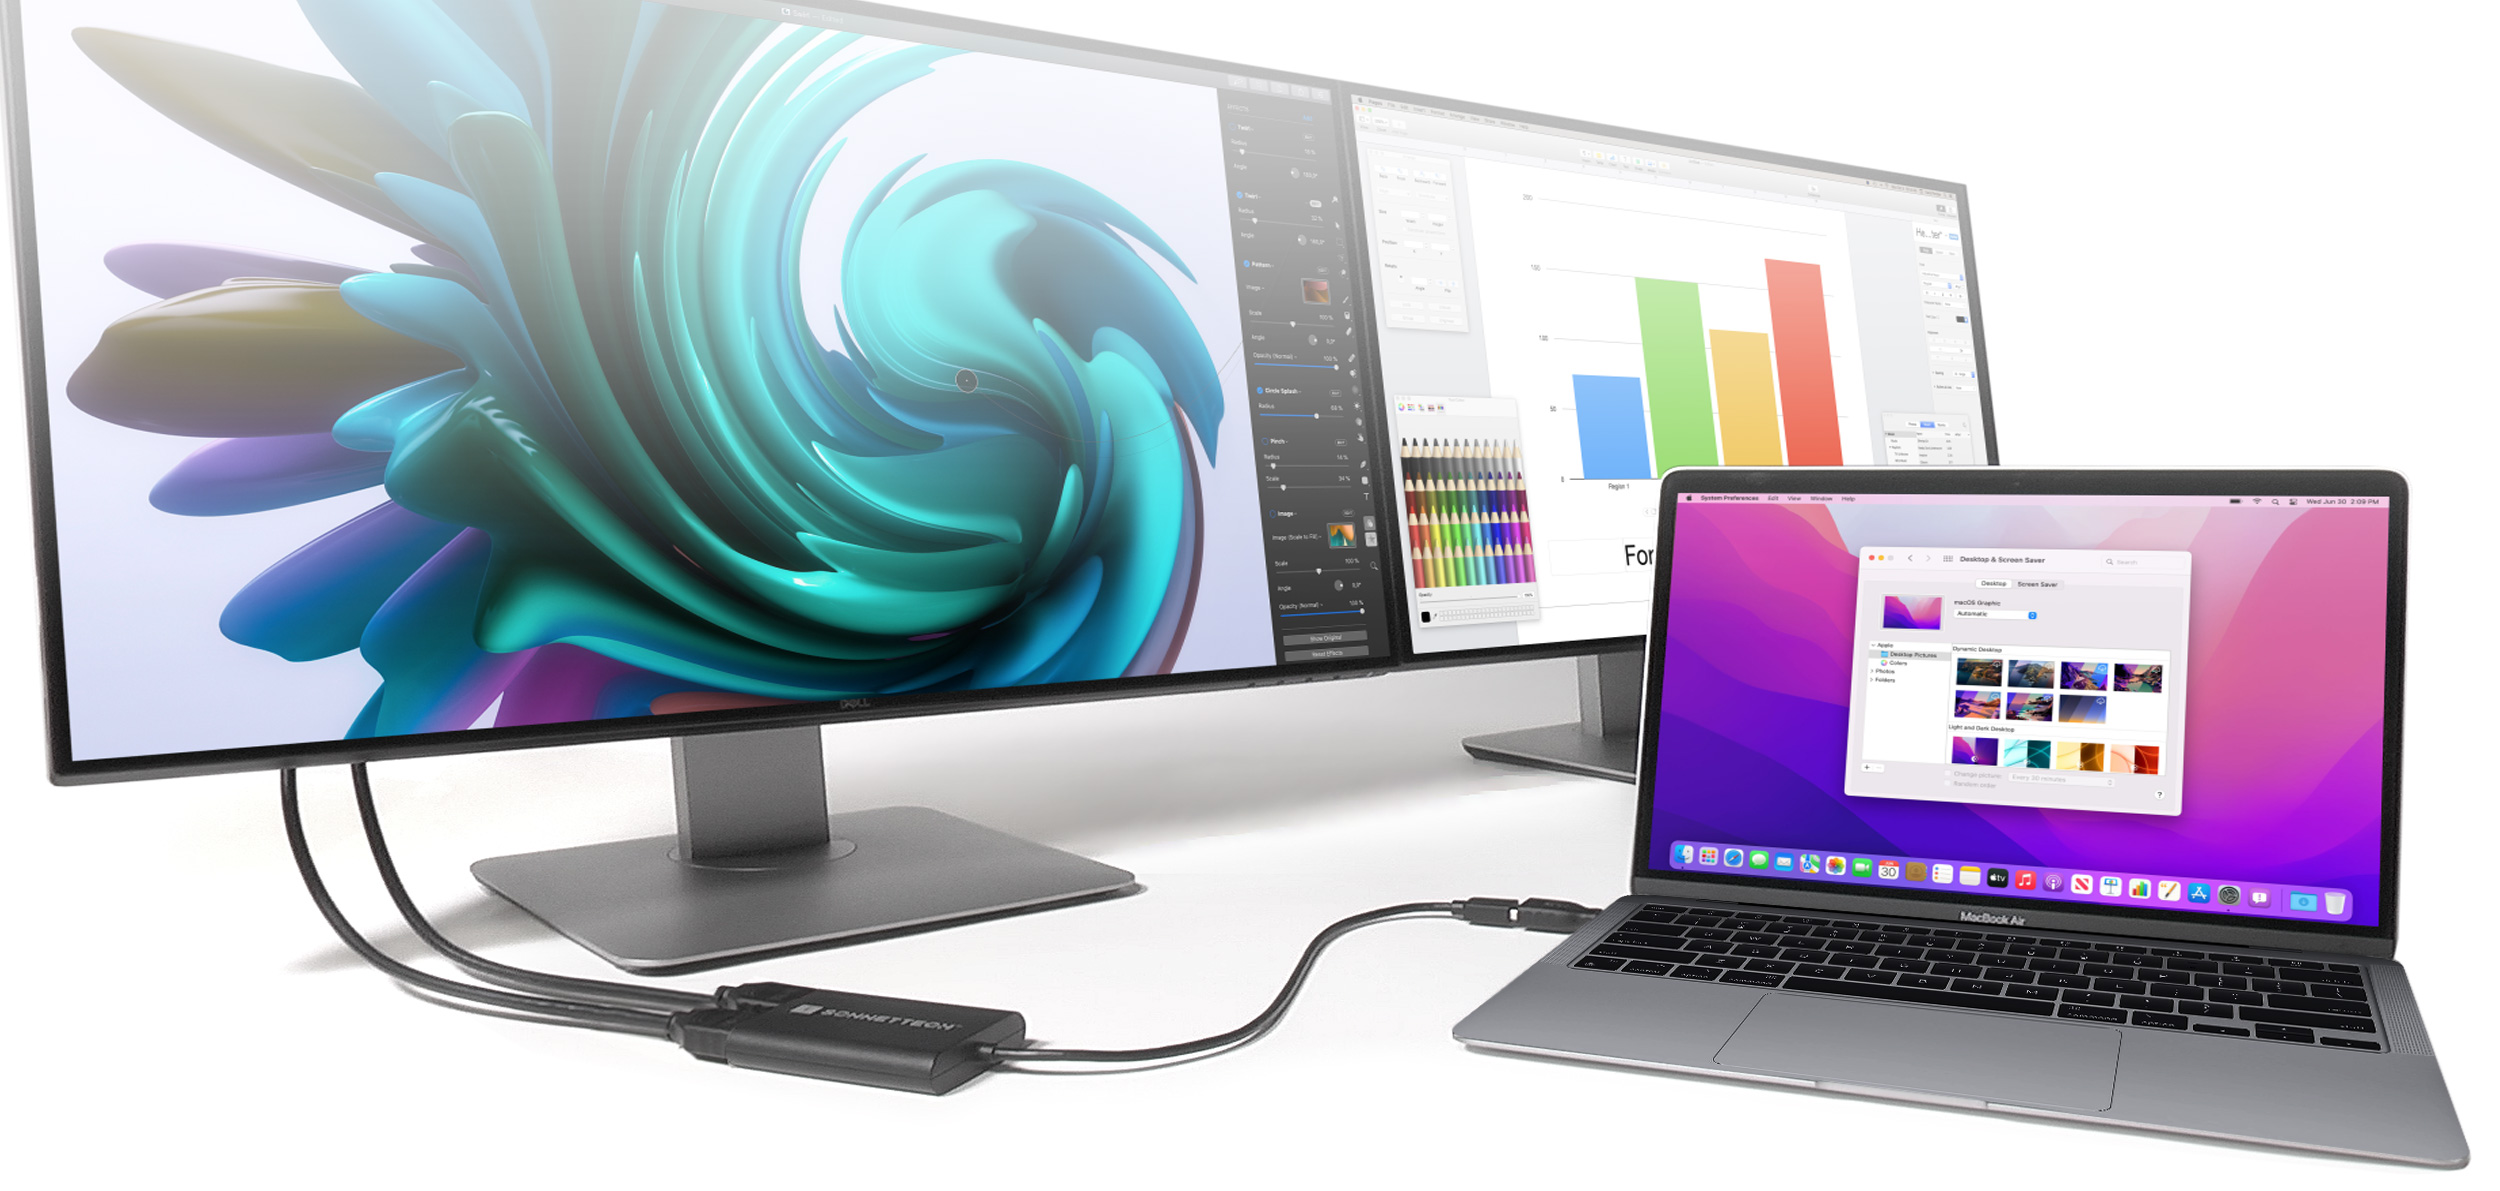 USB-C to Dual 4K 60Hz HDMI Adapter Connected to MacBook Air and Two 4K Displays